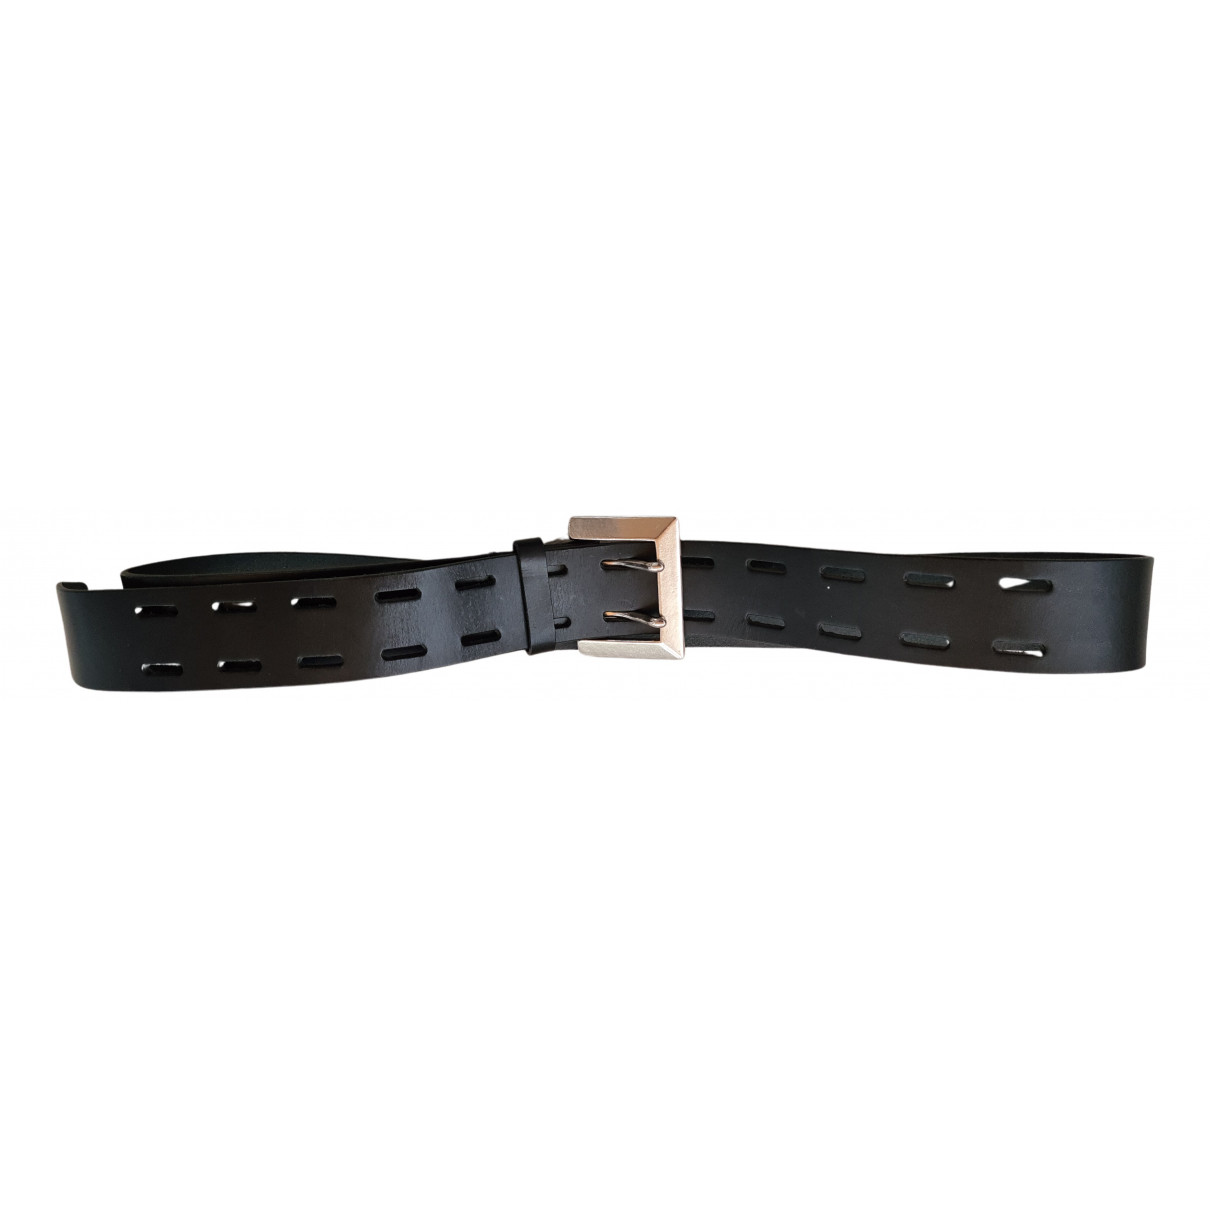 accessories Y's belts for Female Leather 80 cm. Used condition